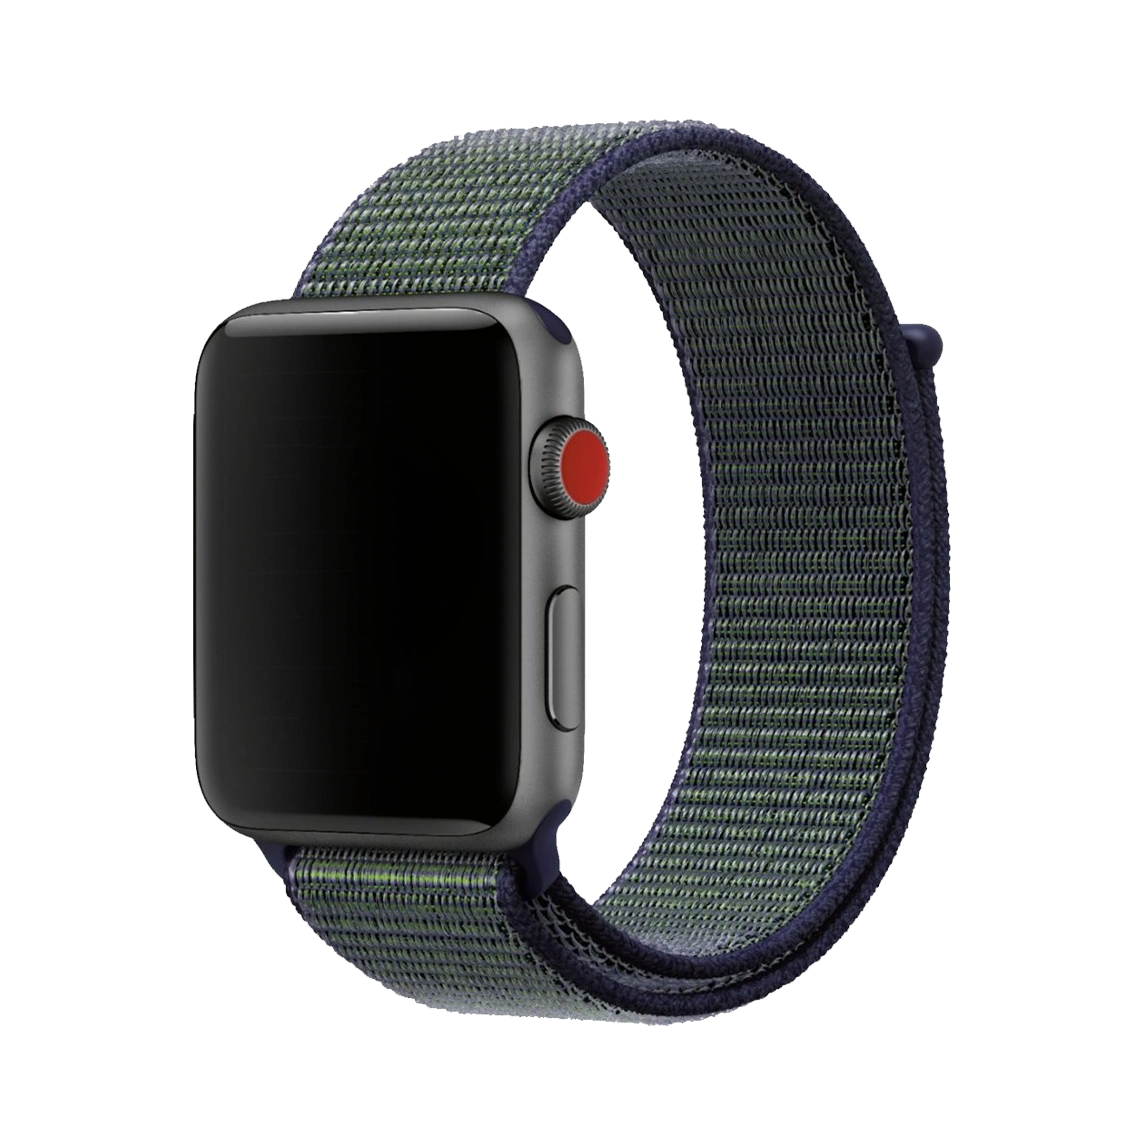 Apple Watch Series 7 Starlight Aluminum Case with Starlight Silicone Band